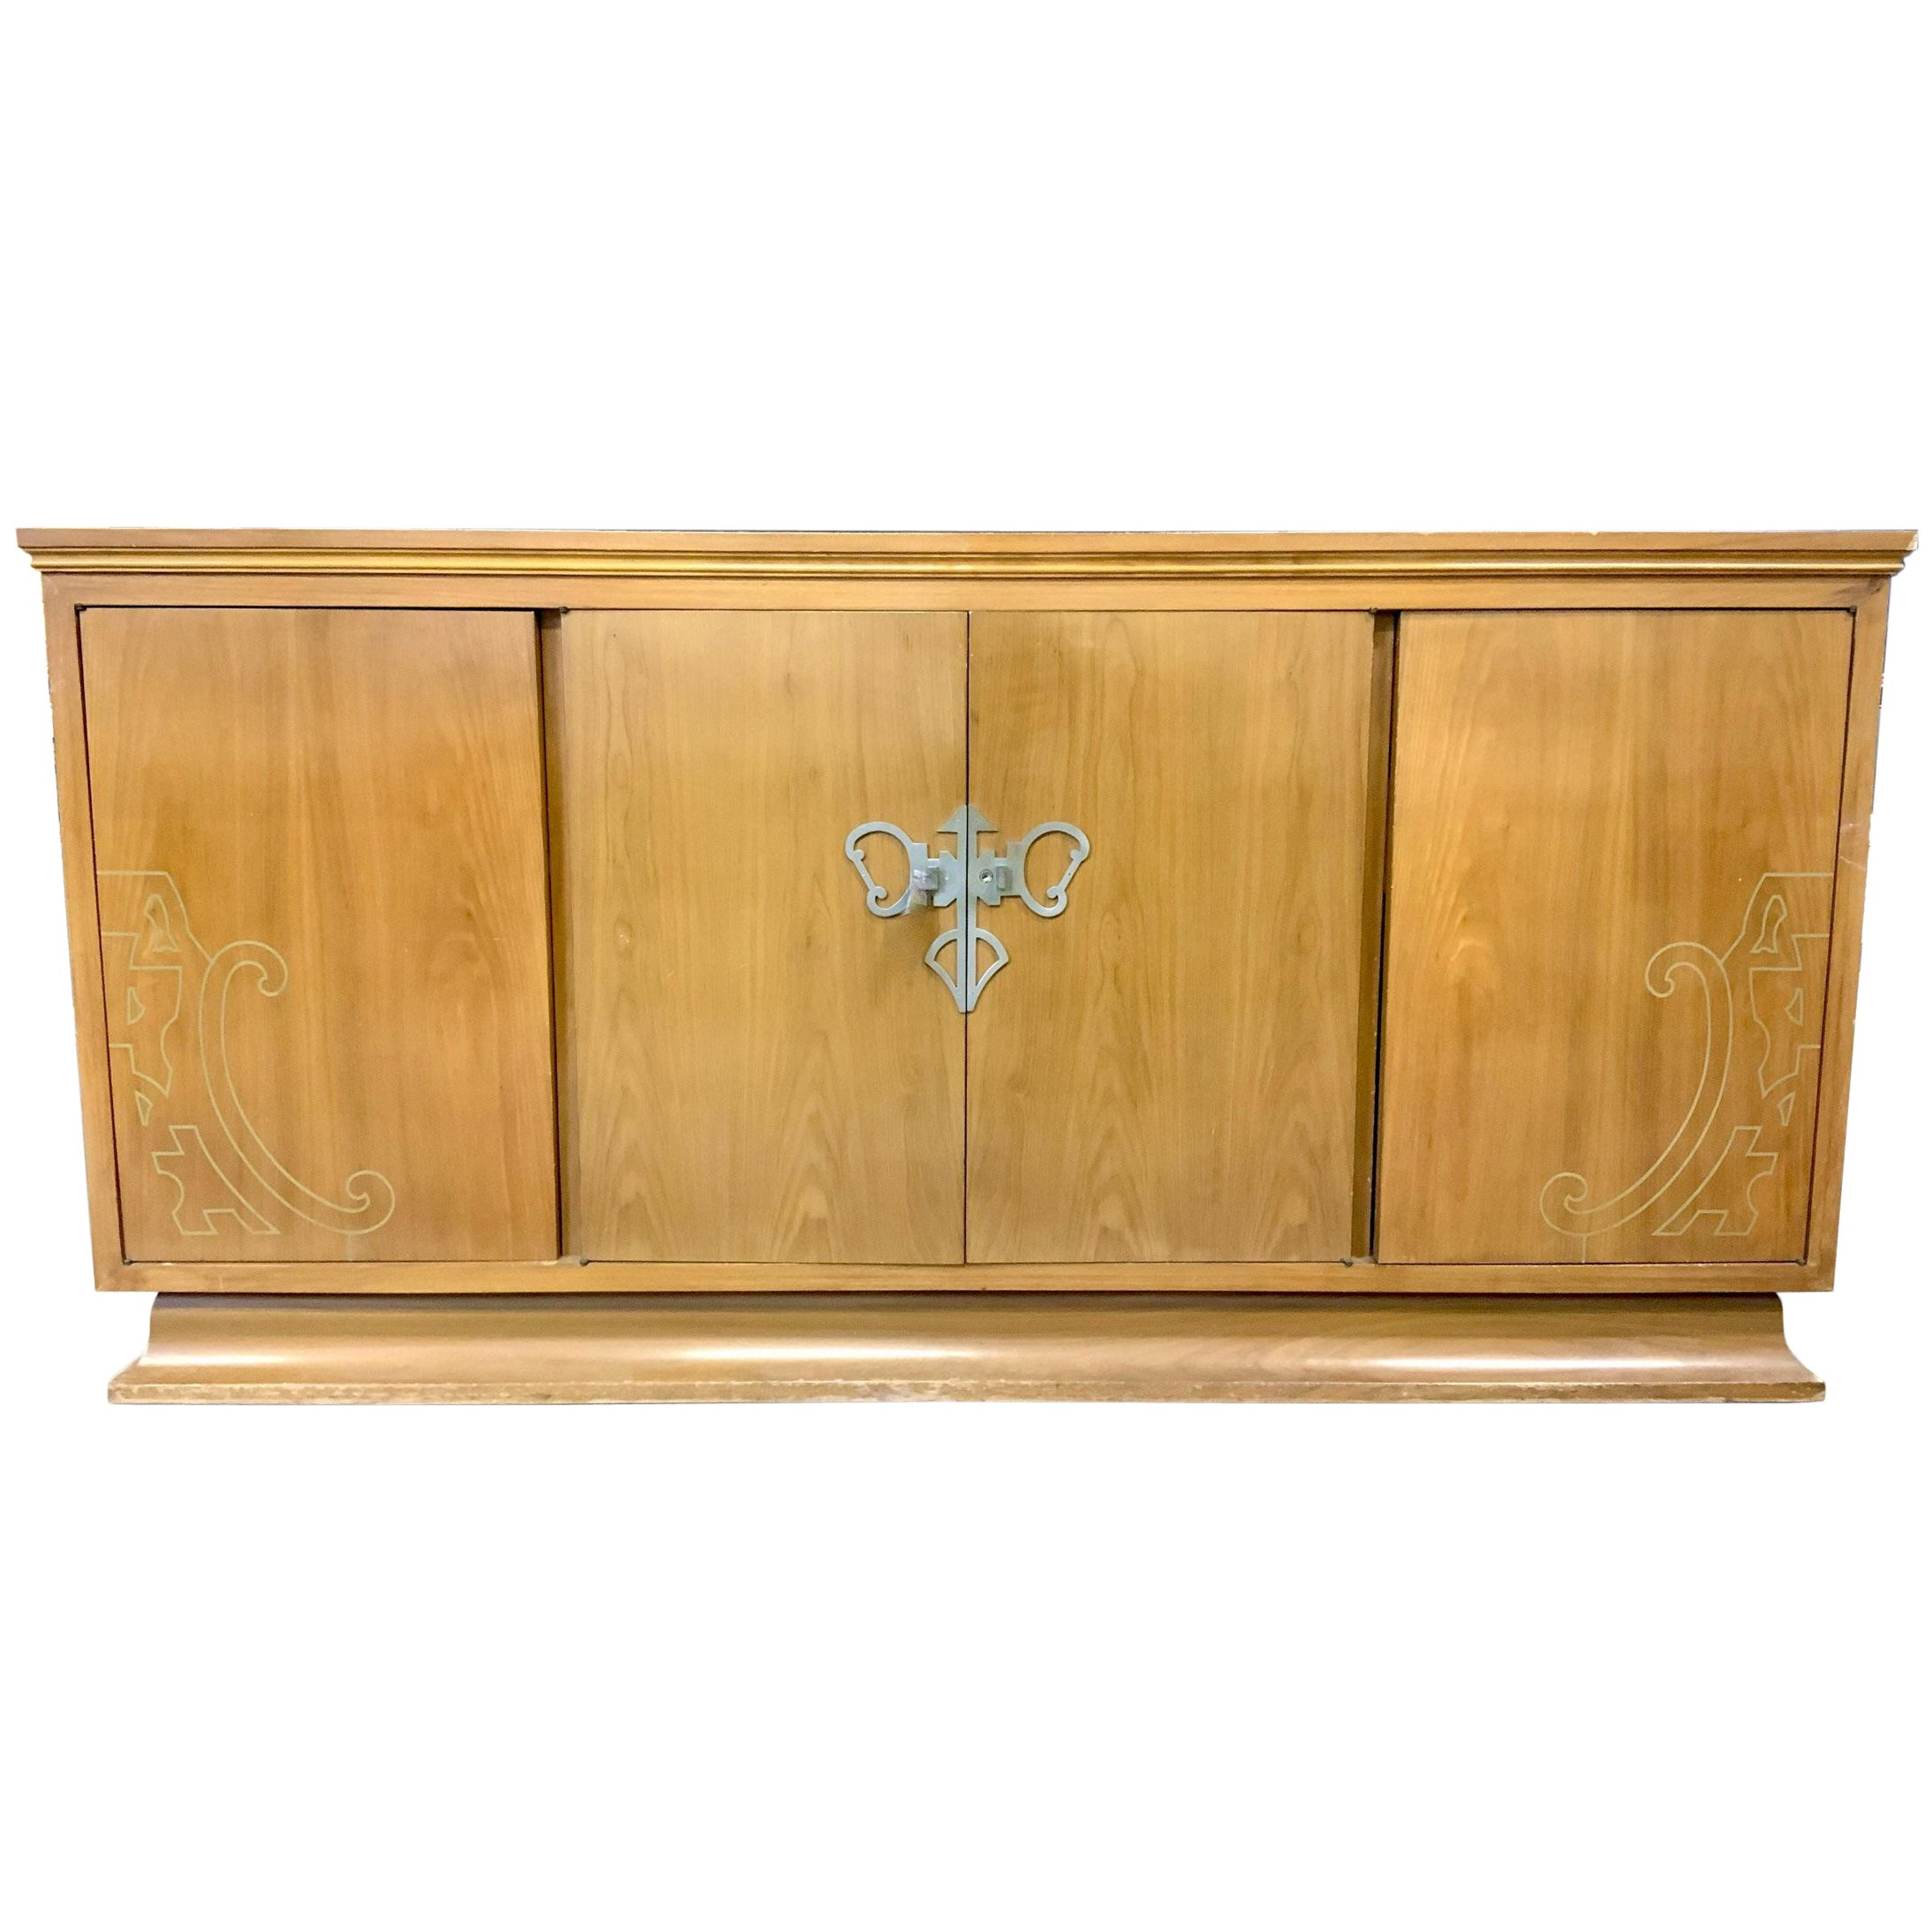 Art Nouveau Style Sideboard with Brass Inlay